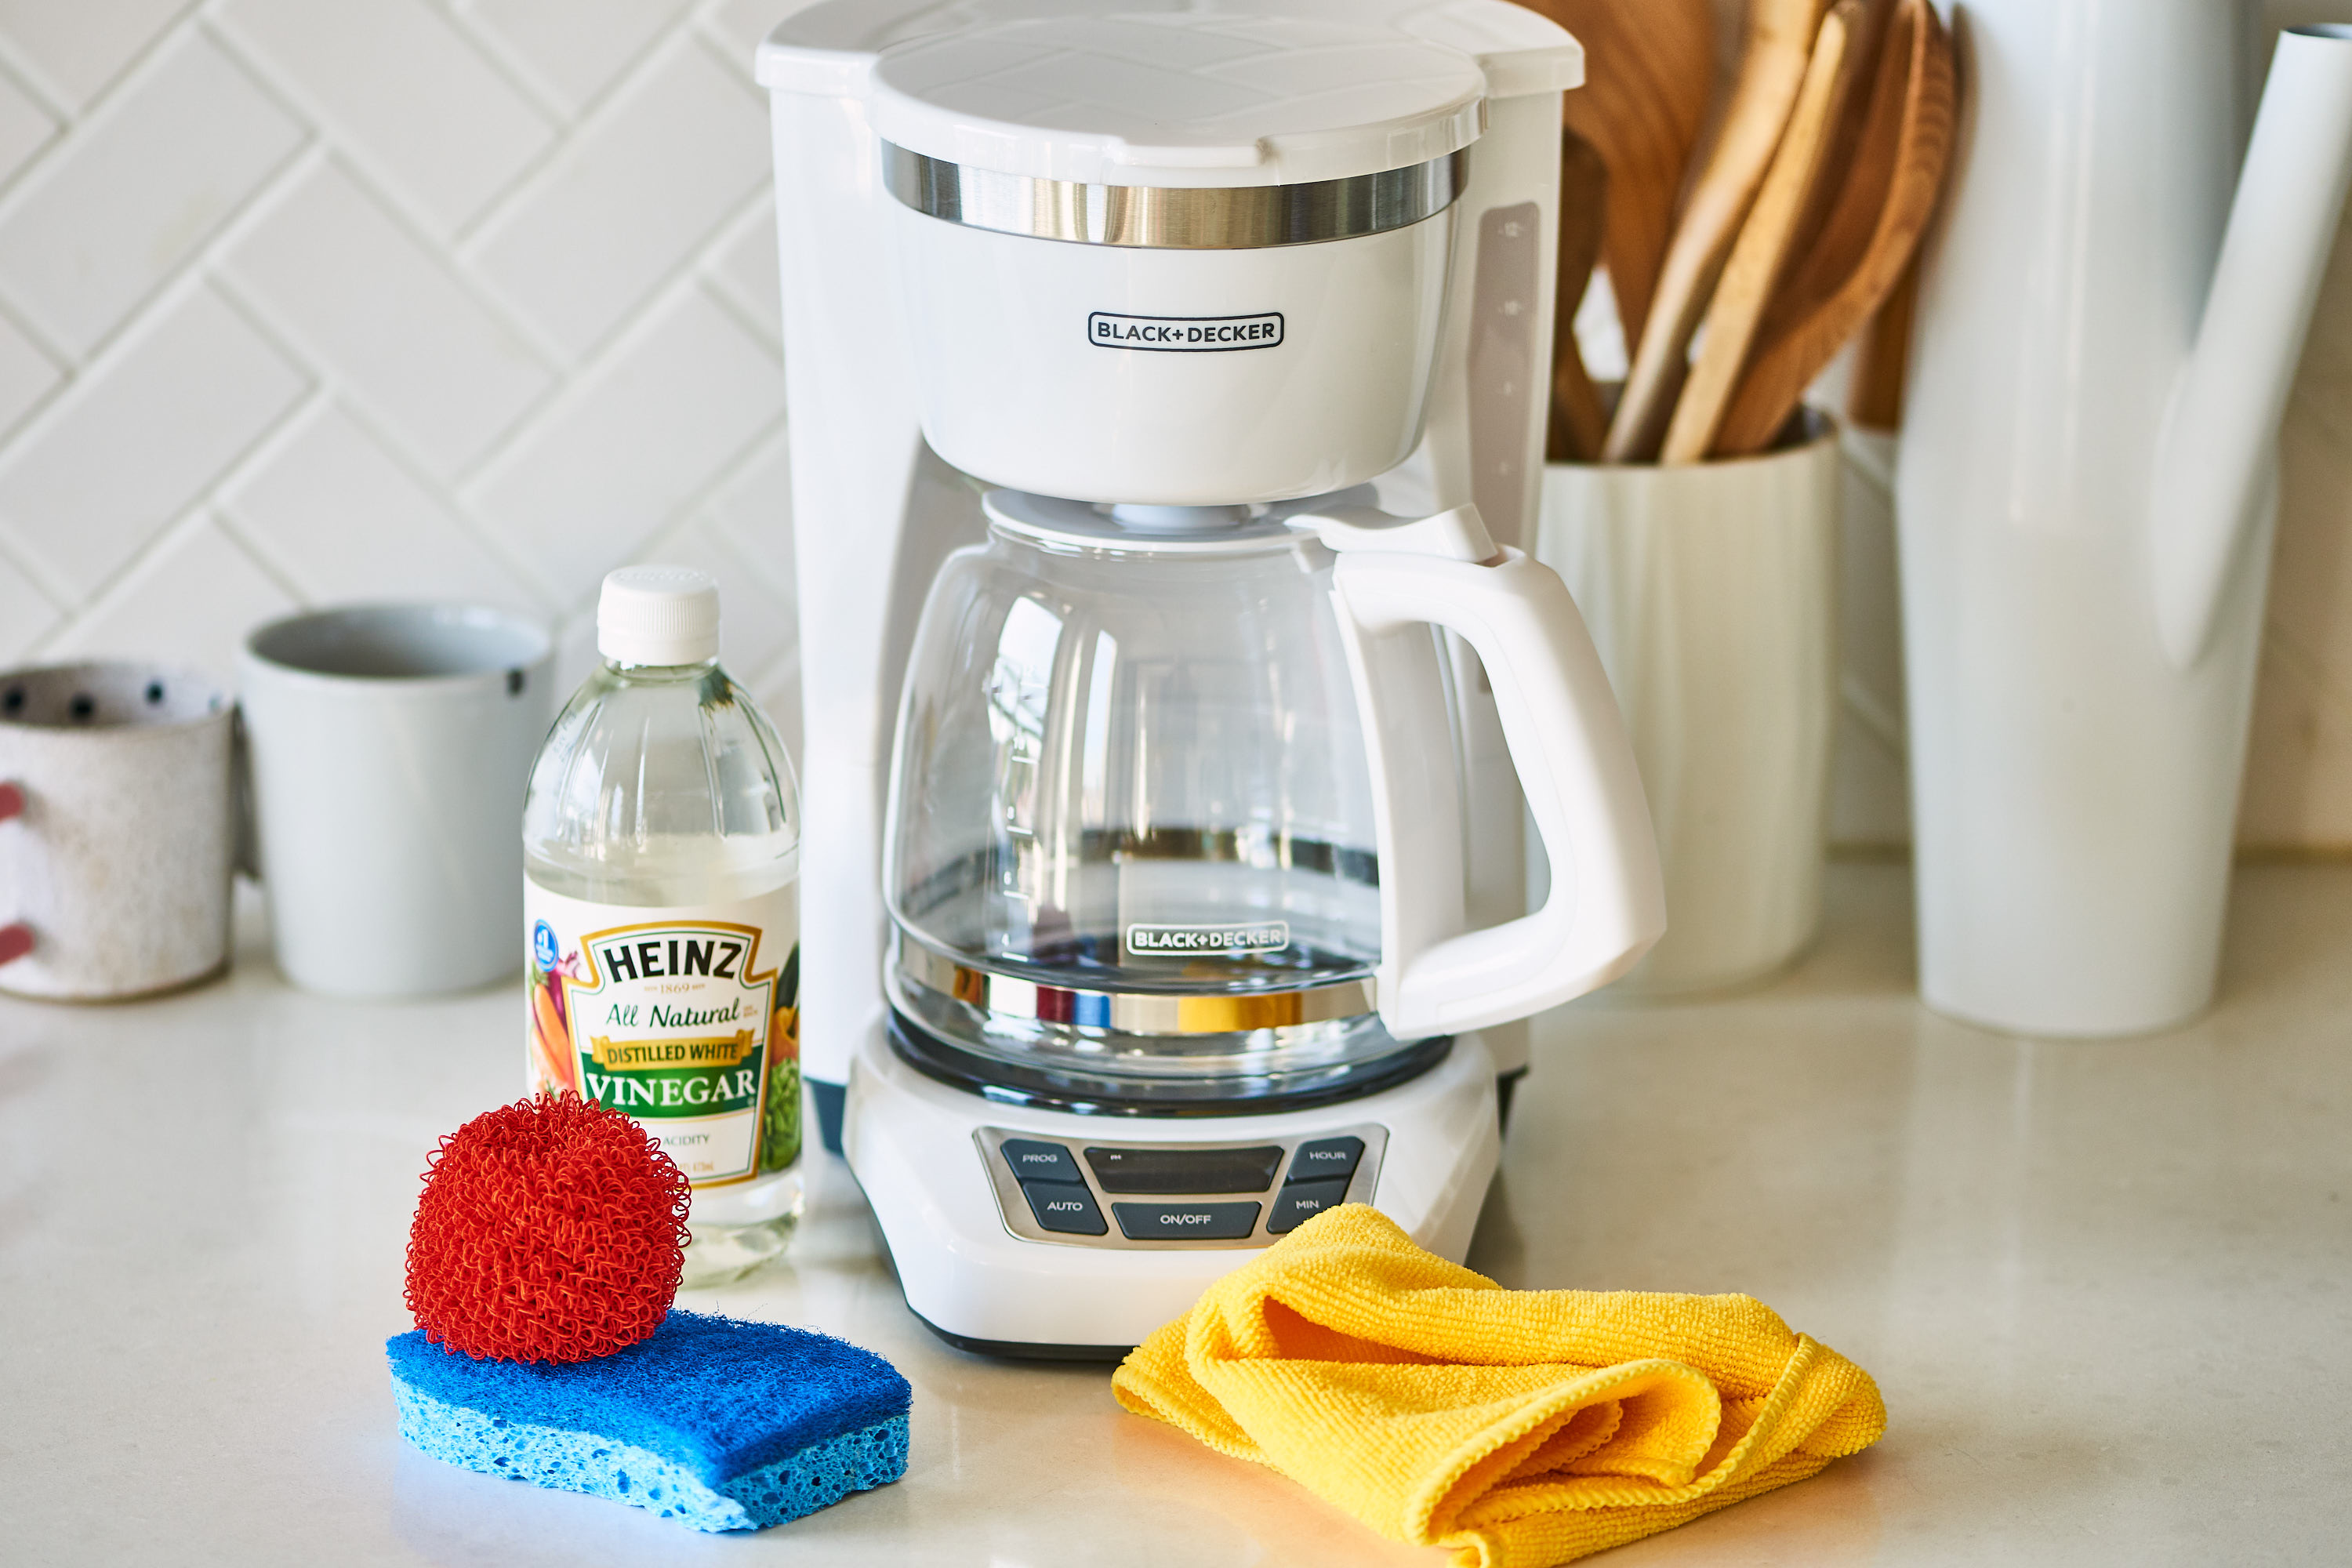 Wash the exterior of the coffee maker with soapy water